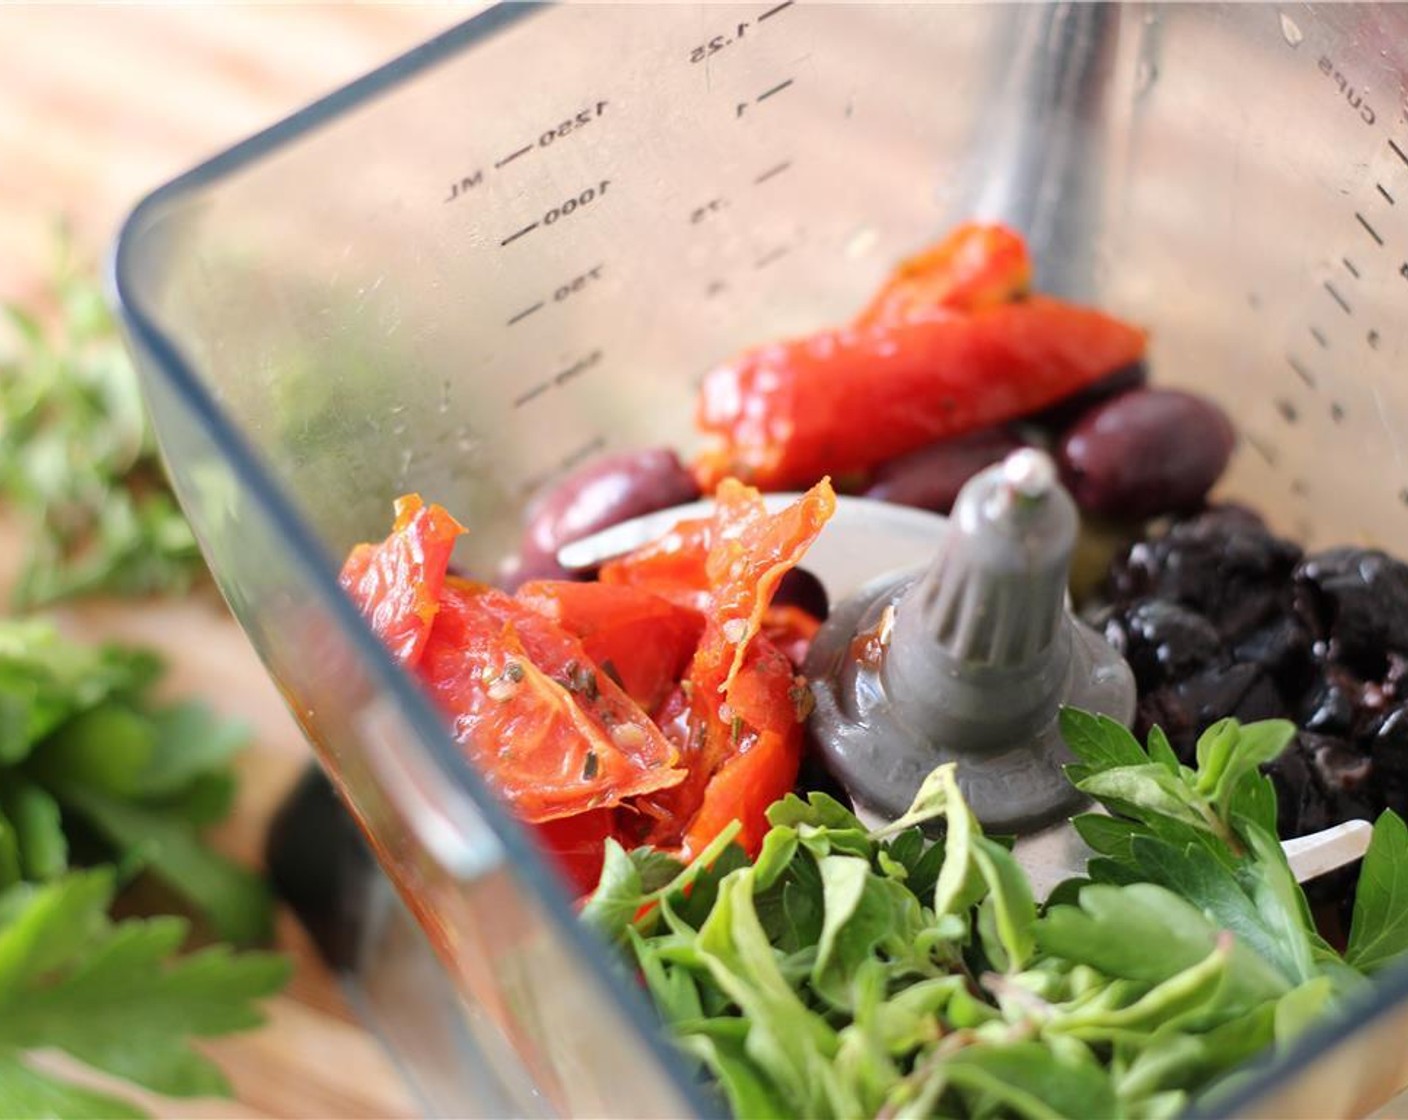 step 1 In a food processor, combine Kalamata Olives (1/2 cup), Green Olives (1/4 cup), Beldi Olives (1/4 cup), Roasted Tomatoes (1/4 cup), Garlic (2 cloves), Fresh Parsley (2 Tbsp), Fresh Oregano (1 Tbsp), 2 Tbsp of juice from Lemon (1) and Olive Oil (2 Tbsp).